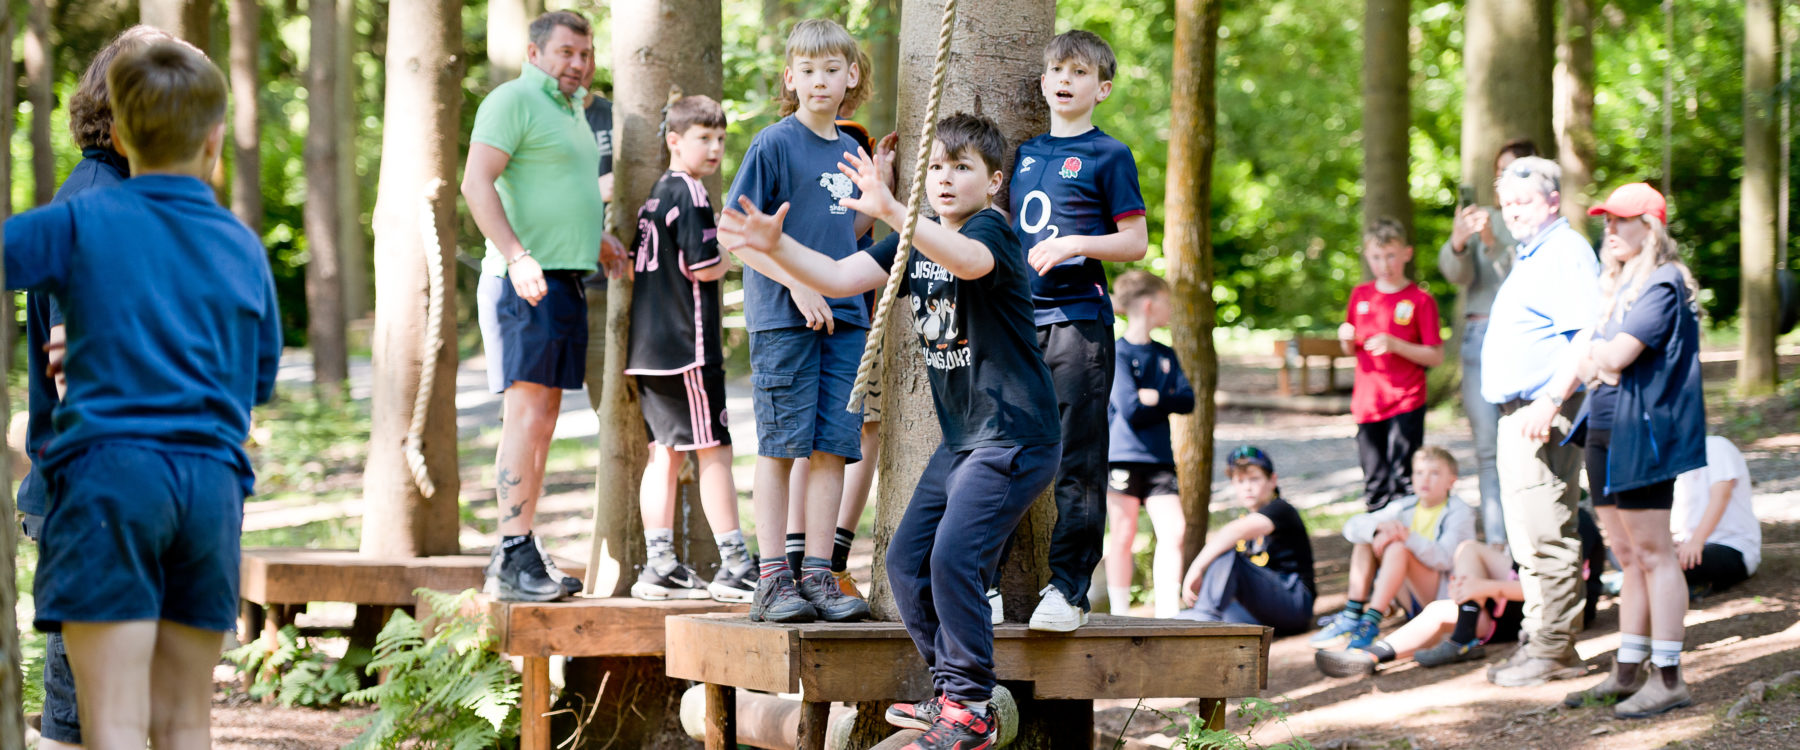 children on low ropes